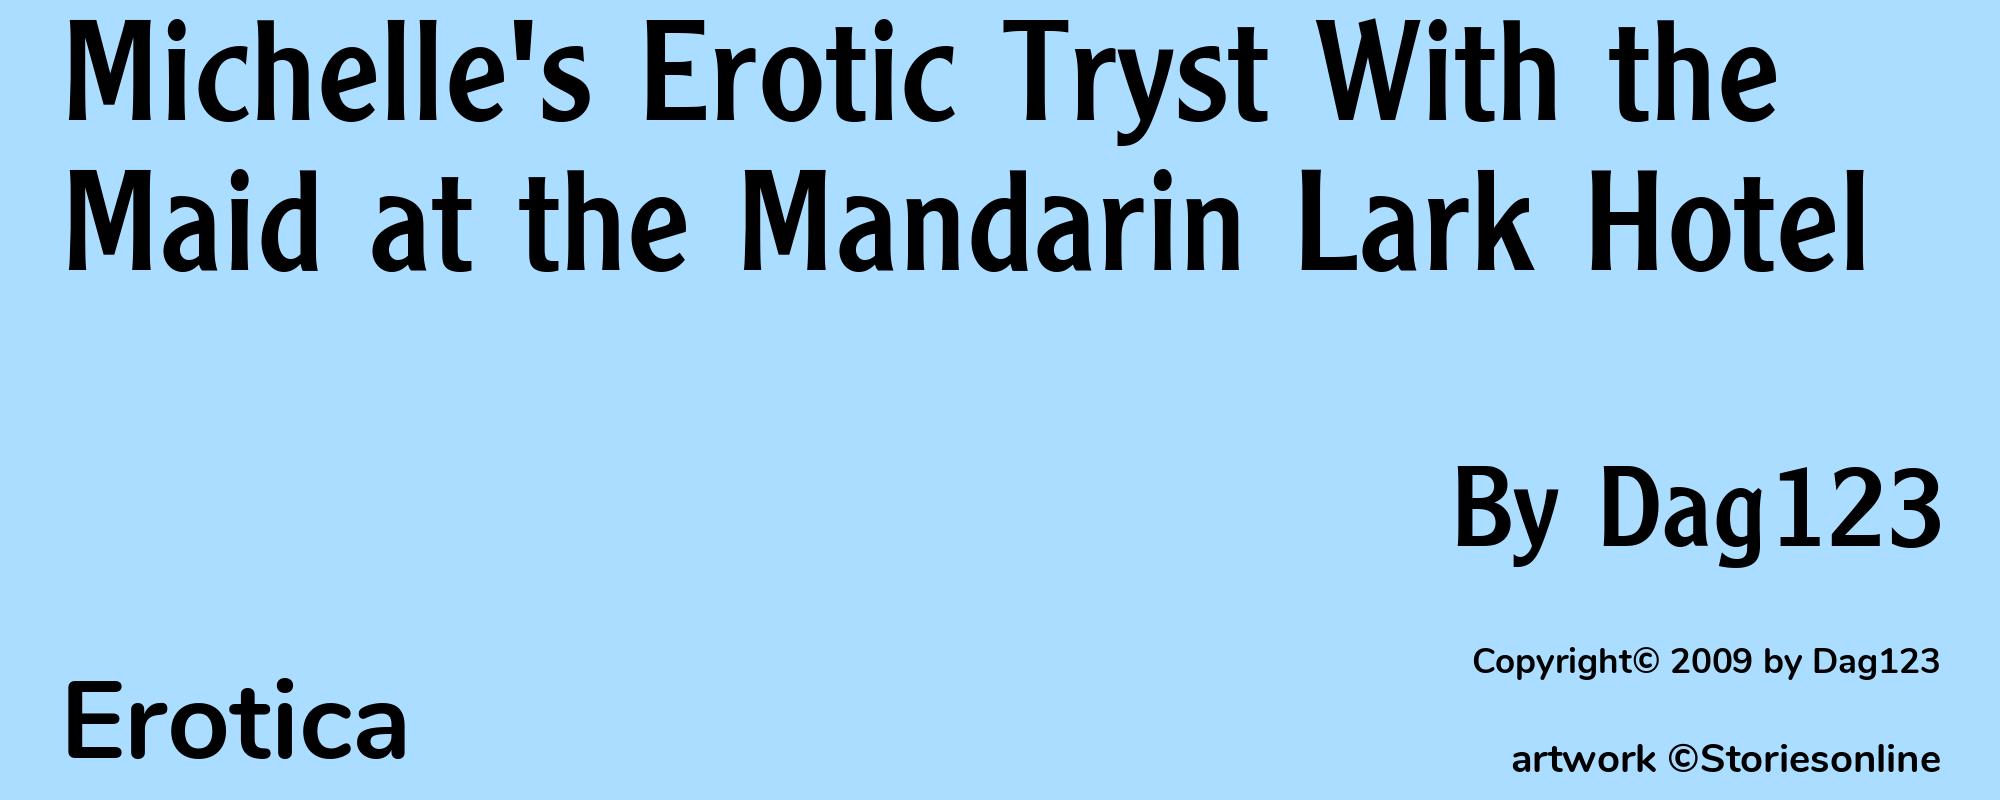 Michelle's Erotic Tryst With the Maid at the Mandarin Lark Hotel - Cover